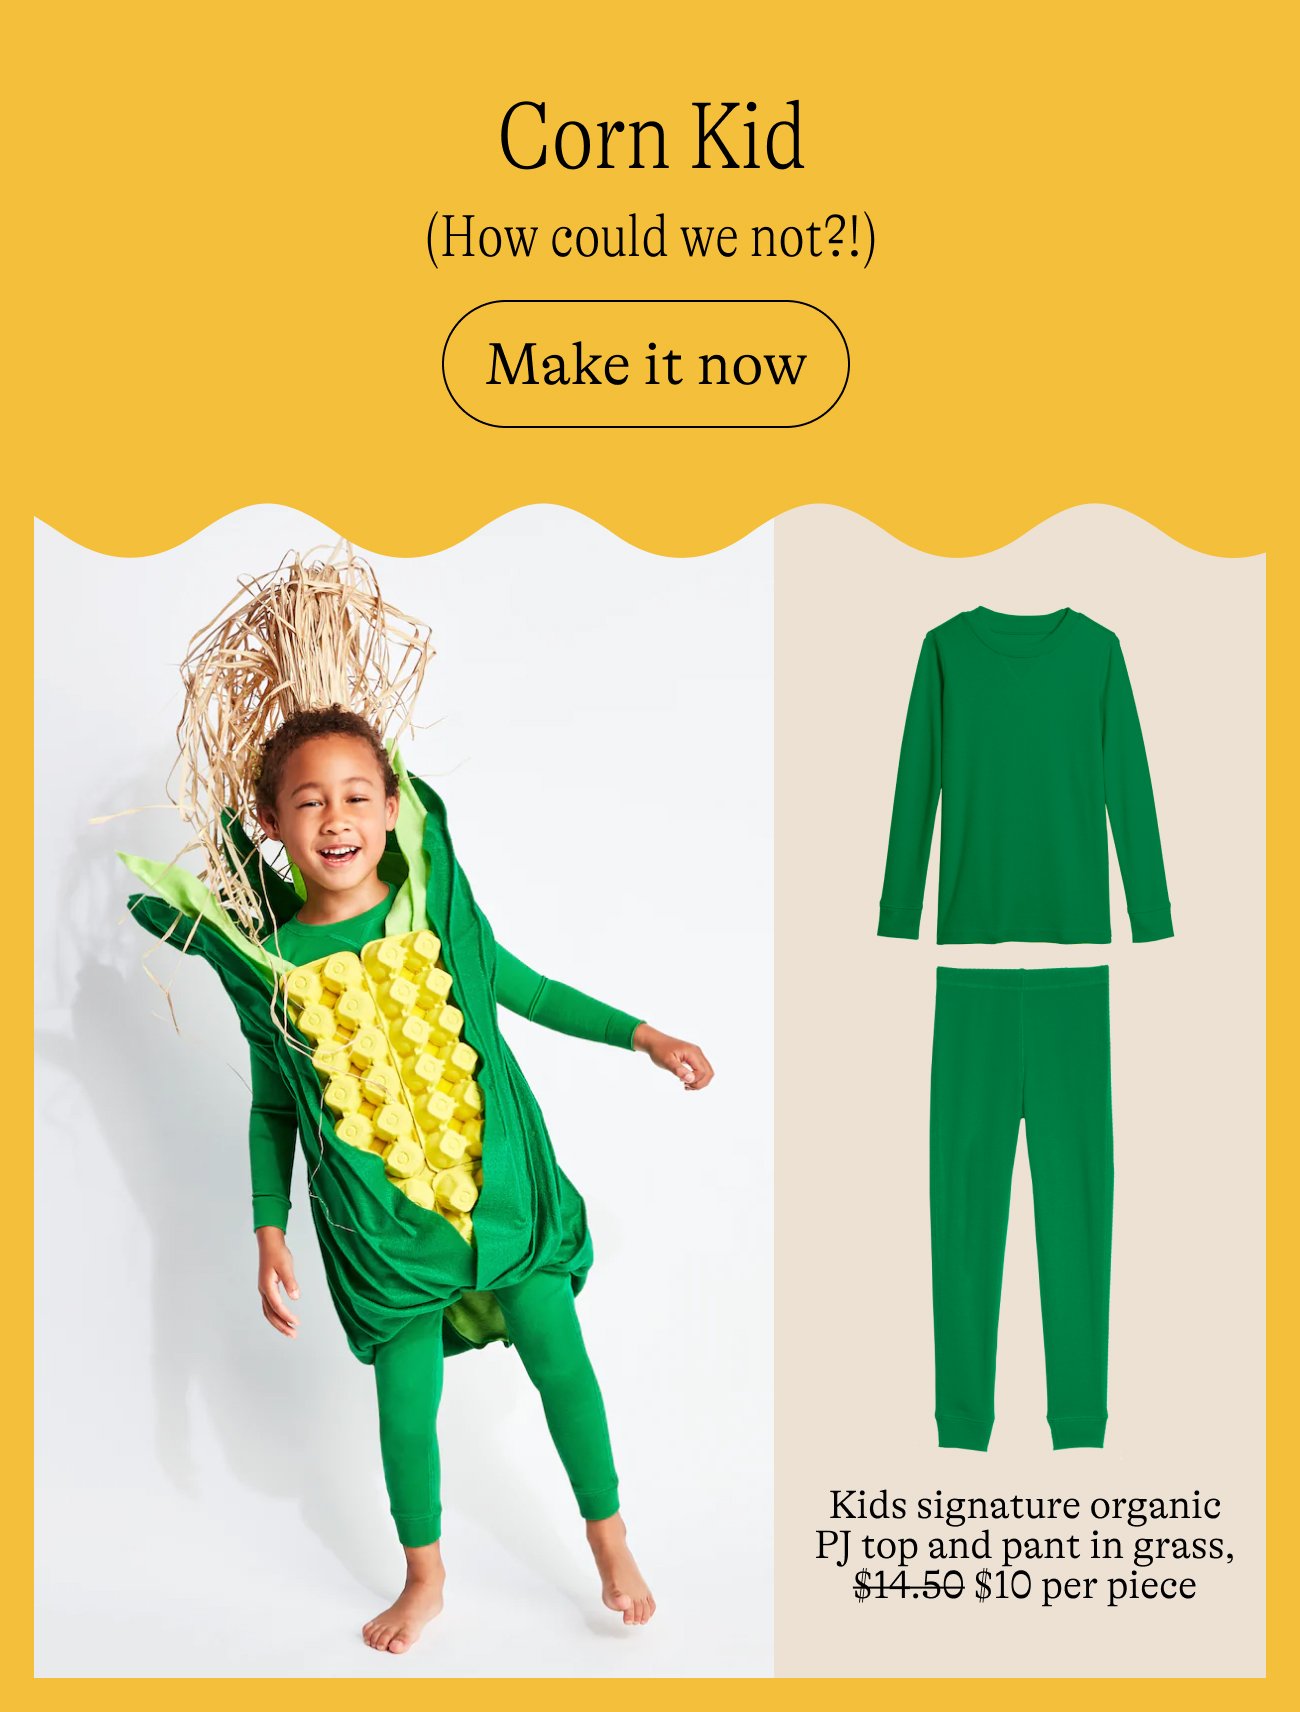 Corn Kid (How could we not?!) Make it now. Kids signature organic PJ top and pant in grass, $10 per piece